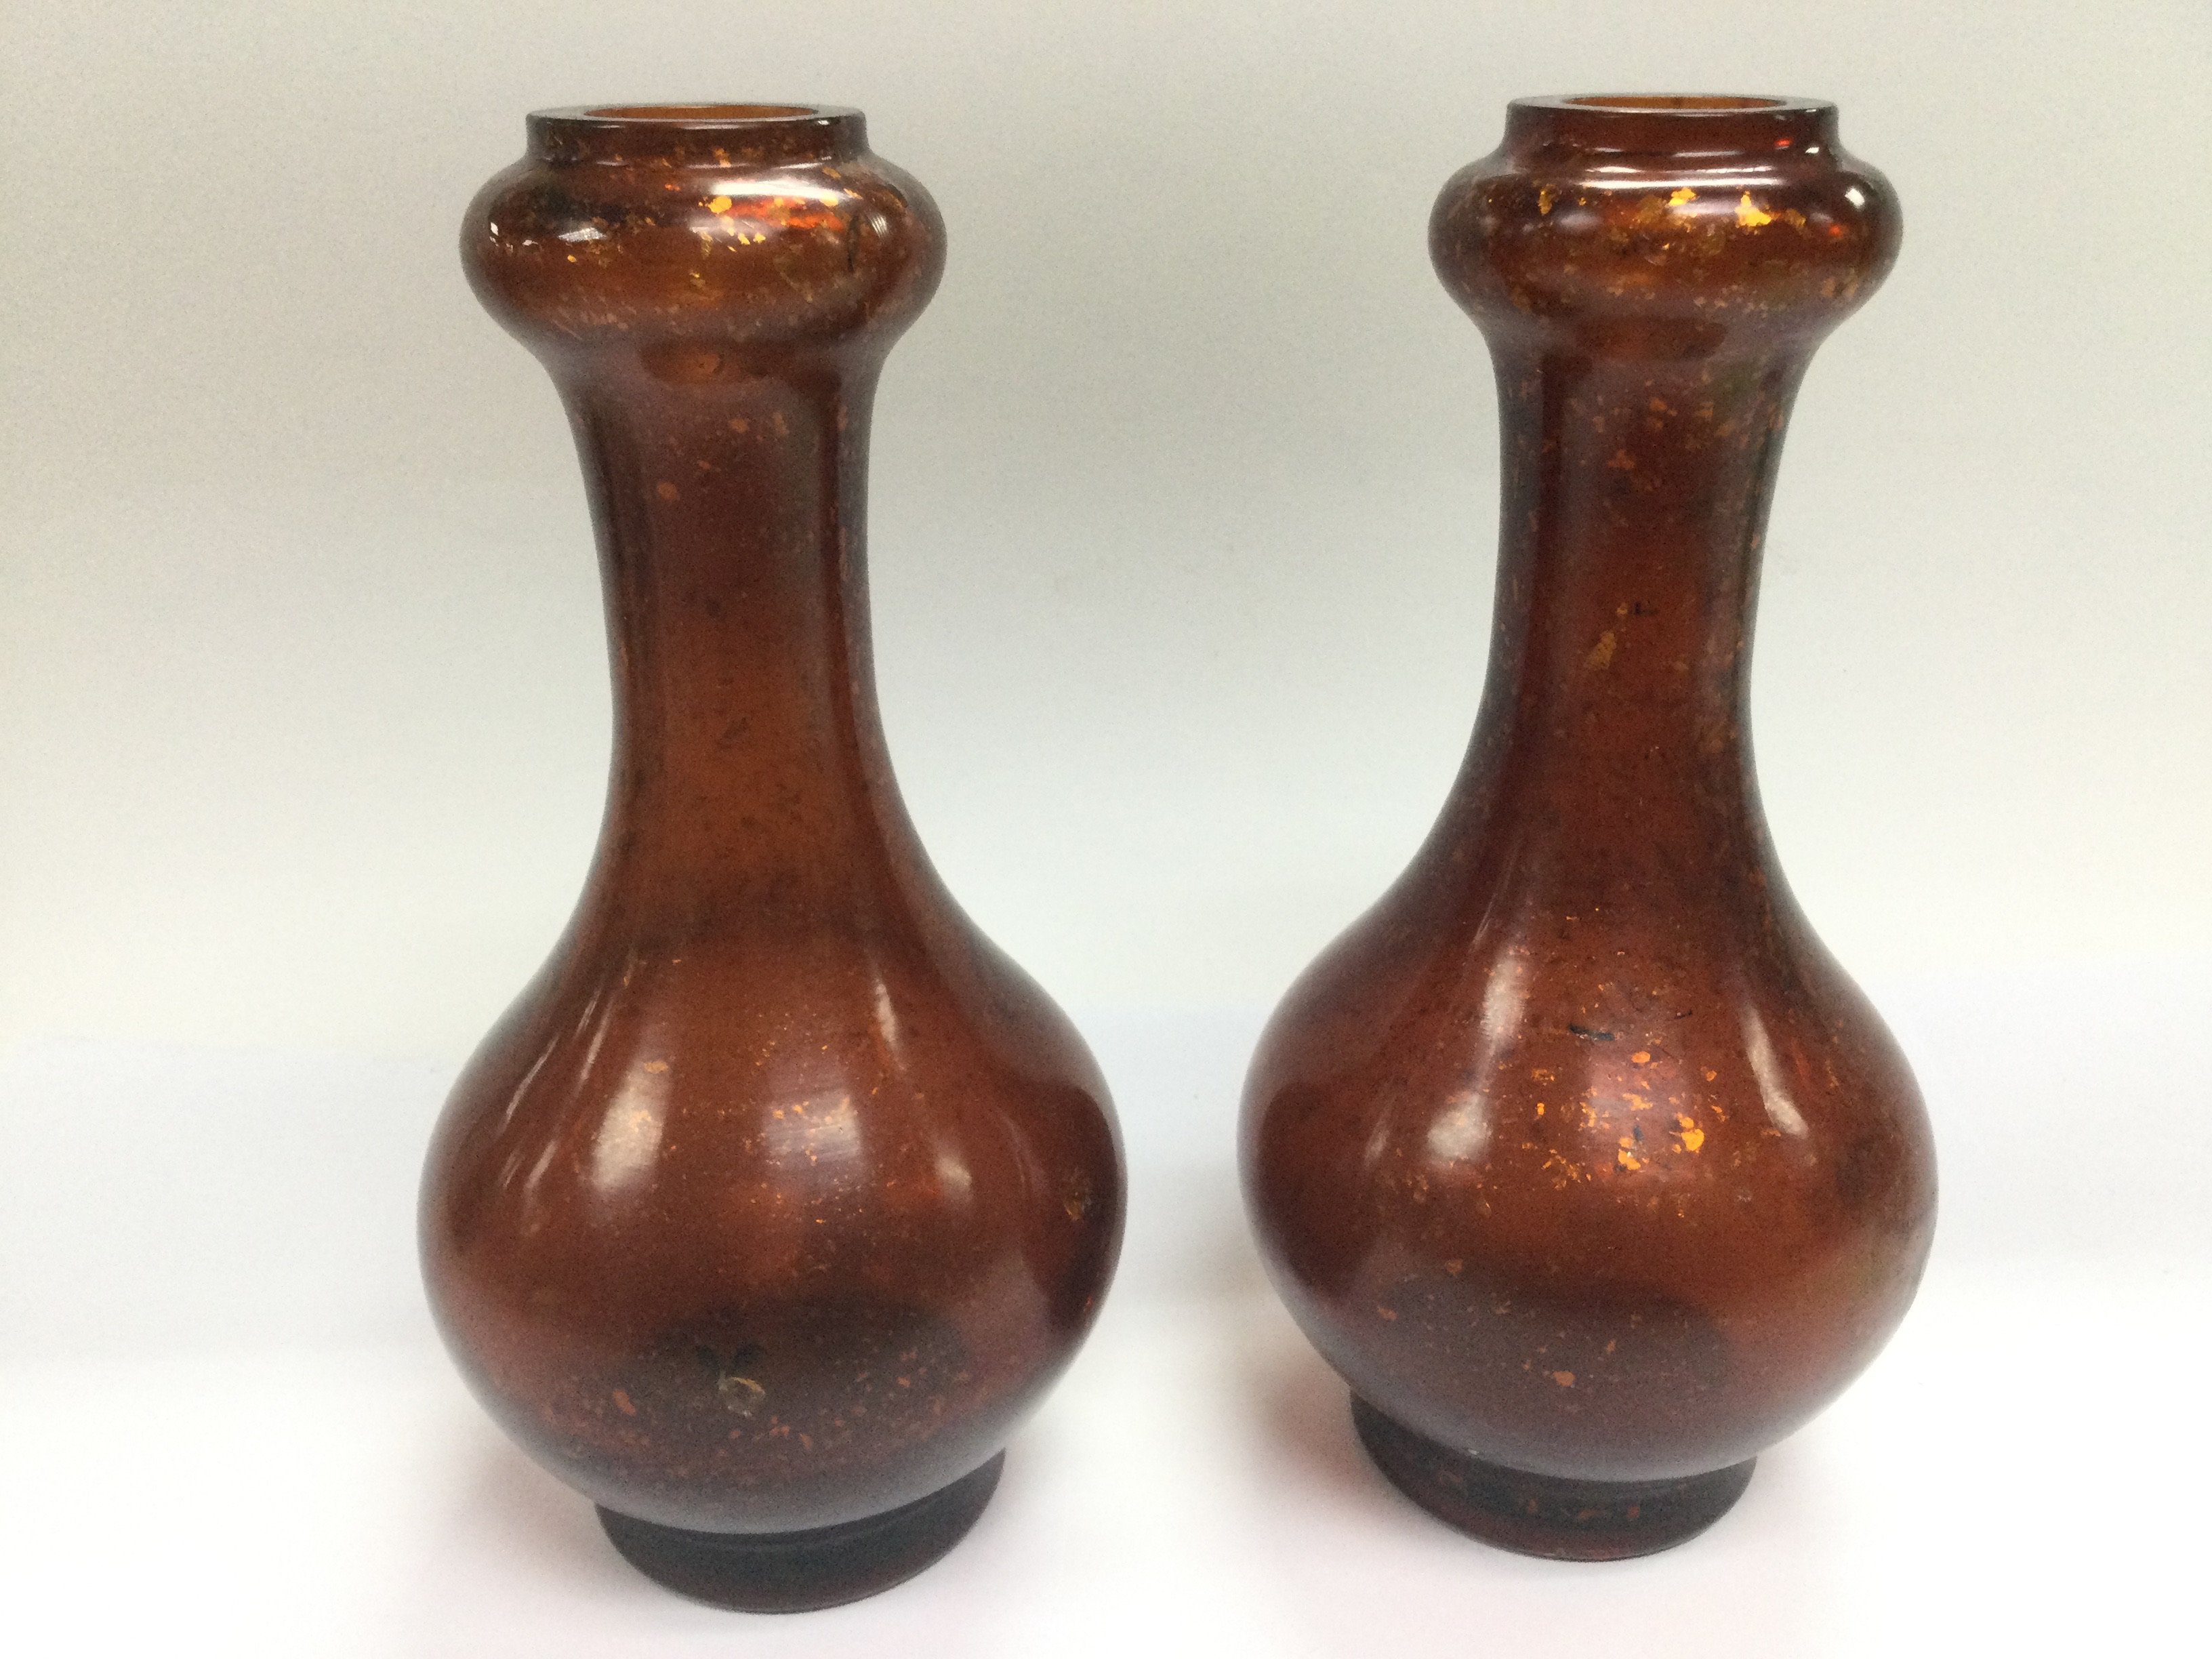 A pair of amber glass vases decorated with gold co